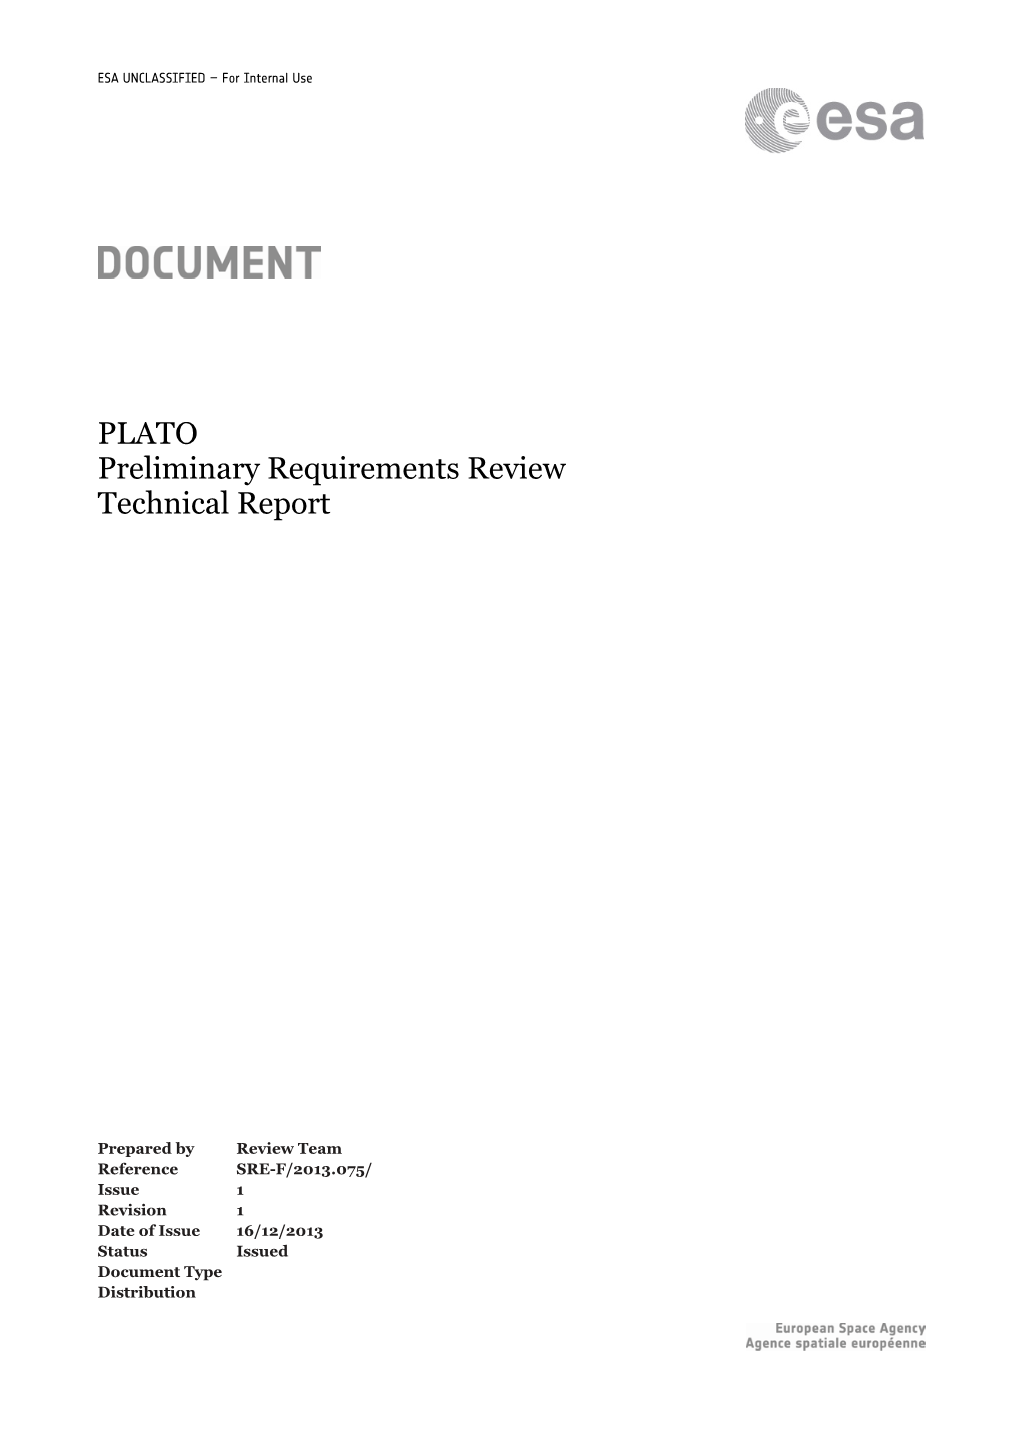 ESA Standard Document Date 16/12/2013 Issue 1 Rev 1 ESA UNCLASSIFIED – for Internal Use